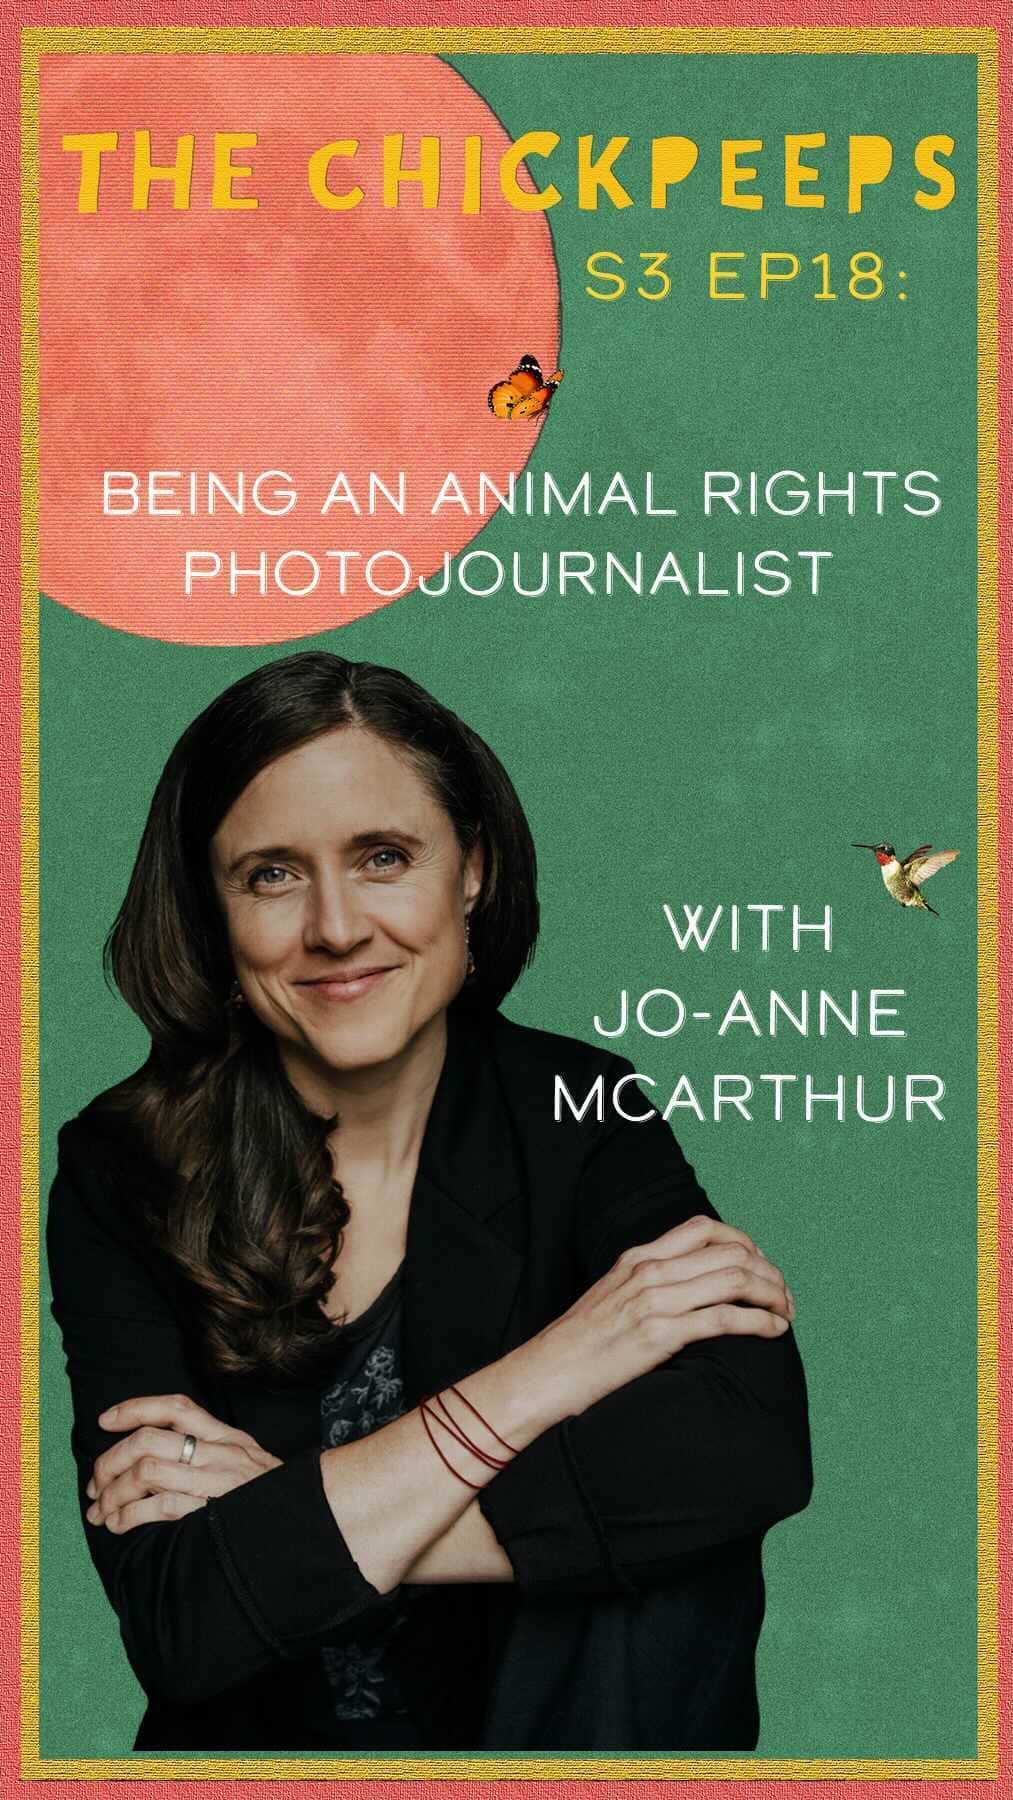 イヴァナ・リンチのインスタグラム：「We’ve been so busy having incredible conversations over on @chickpeepspod lately that I keep forgetting to post about them!! 🙀 This conversation with Jo-Anne McArthur, photographer and founder of @weanimals was particularly fascinating and uplifting to me. Jo-Anne has been documenting humanity’s relationship with animals for the past 2 decades and has been in some of the darkest, grimmest, saddest places on earth to capture moments in the lives of the animals people exploit but never see or acknowledge. I was so curious to ask her, having exposed herself to animal suffering for so many years, whether or not she still remains hopeful about human nature, and how does she stay optimistic enough to keep doing this incredibly difficult work and sharing the story of the plight of animals through her powerful images. She had so many insightful things to say, and this conversation gave me a lot of hope, and further appreciation for the impact storytelling can have on people.  Also, check out Jo-Anne’s organisation @weanimals to see more of her work, and the work of dozens of other animal rights photographers - they are breathtaking. And she and her team offer an online masterclass for anyone interested in learning how to be an animal rights photojournalist. A few ChickPeeps have been taking the course and are finding it so eye-opening.   Link to the full episode is in my bio! 🎧   #vegan #veganpodcast #ChickPeepsPodcast #WeAnimals #JoanneMcArthur #animalrights #photojournalism」